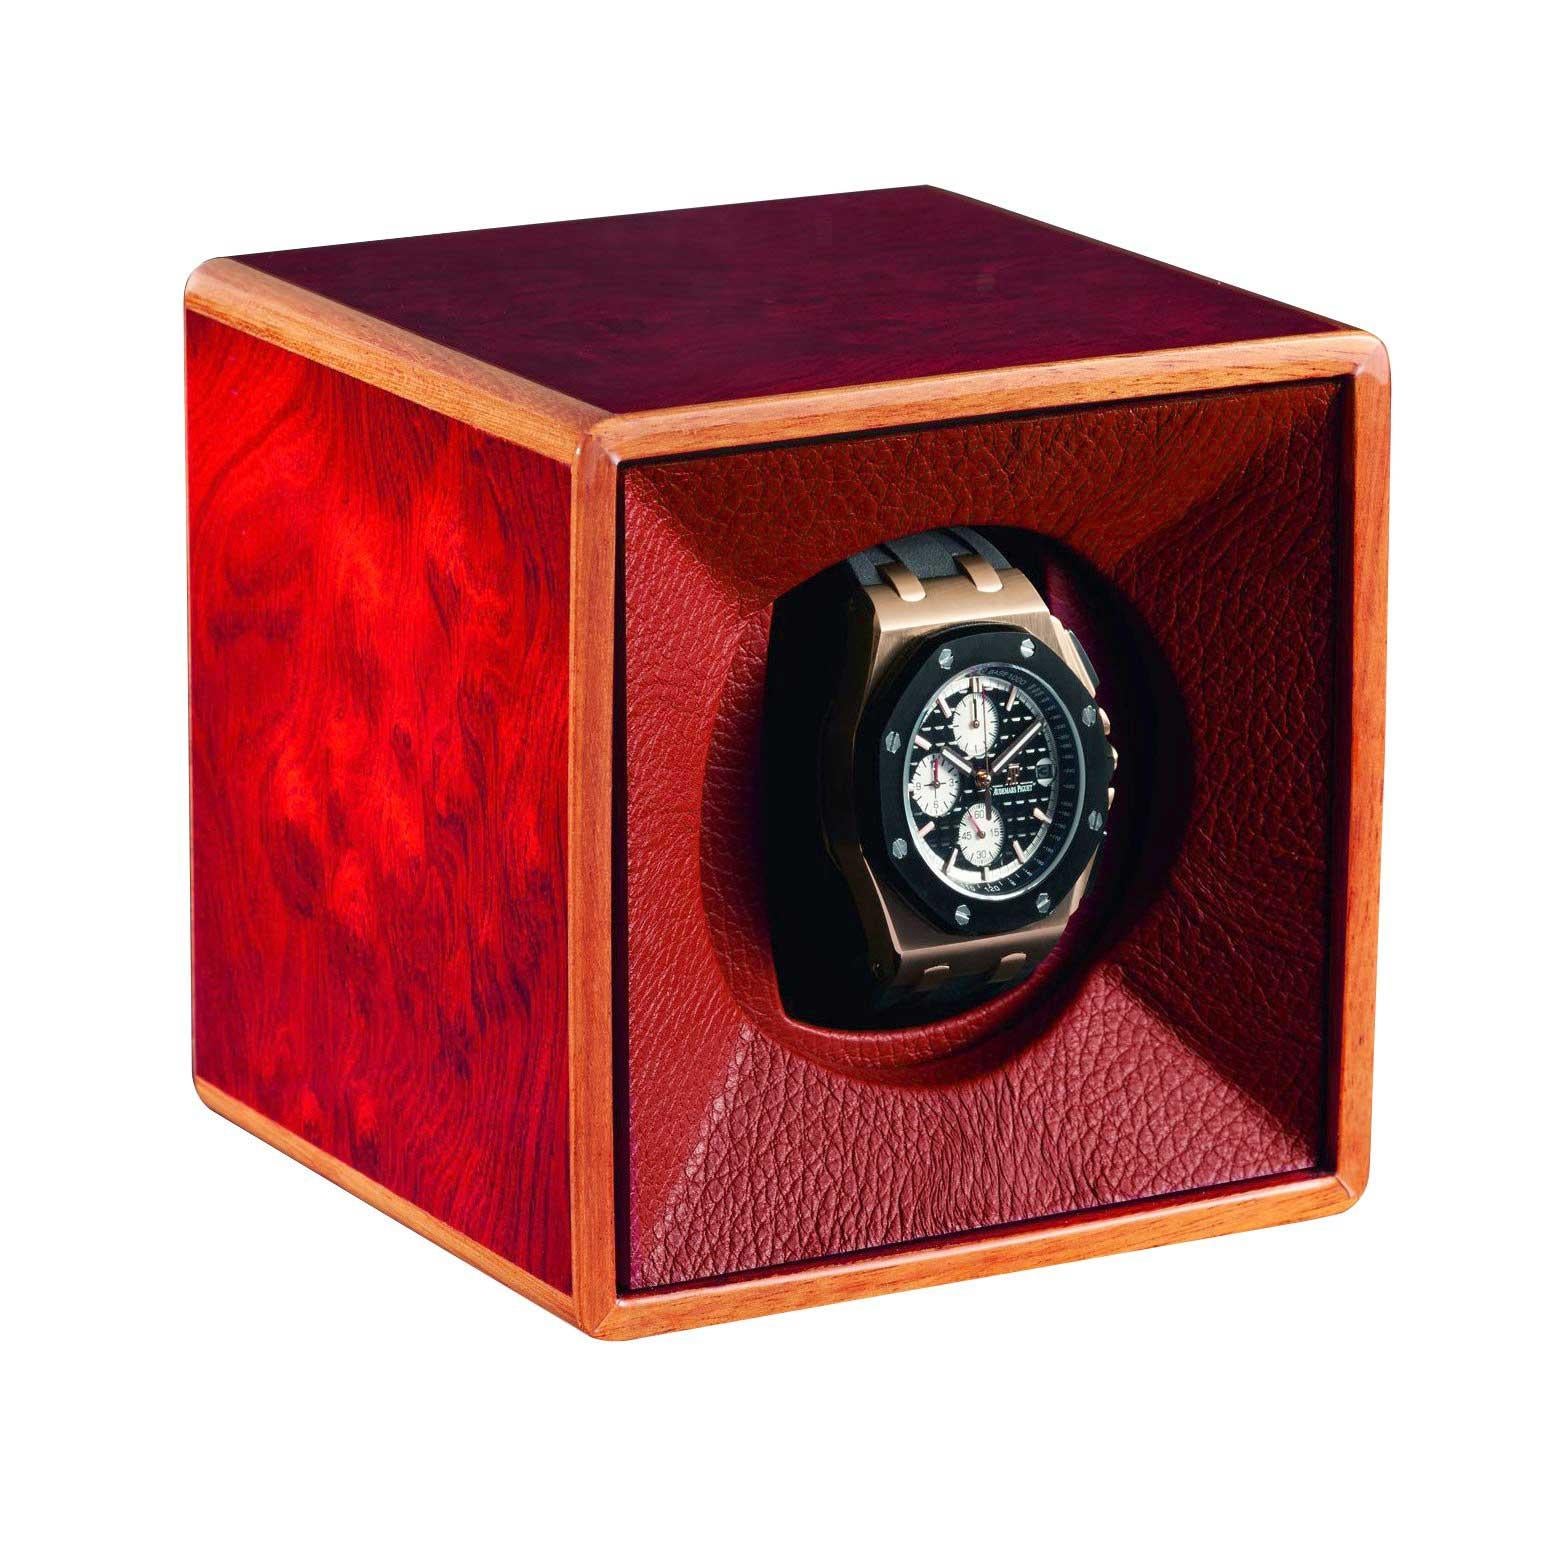 Tempo Unico Rosso Red Watch Winder Lined in Leather by Agresti